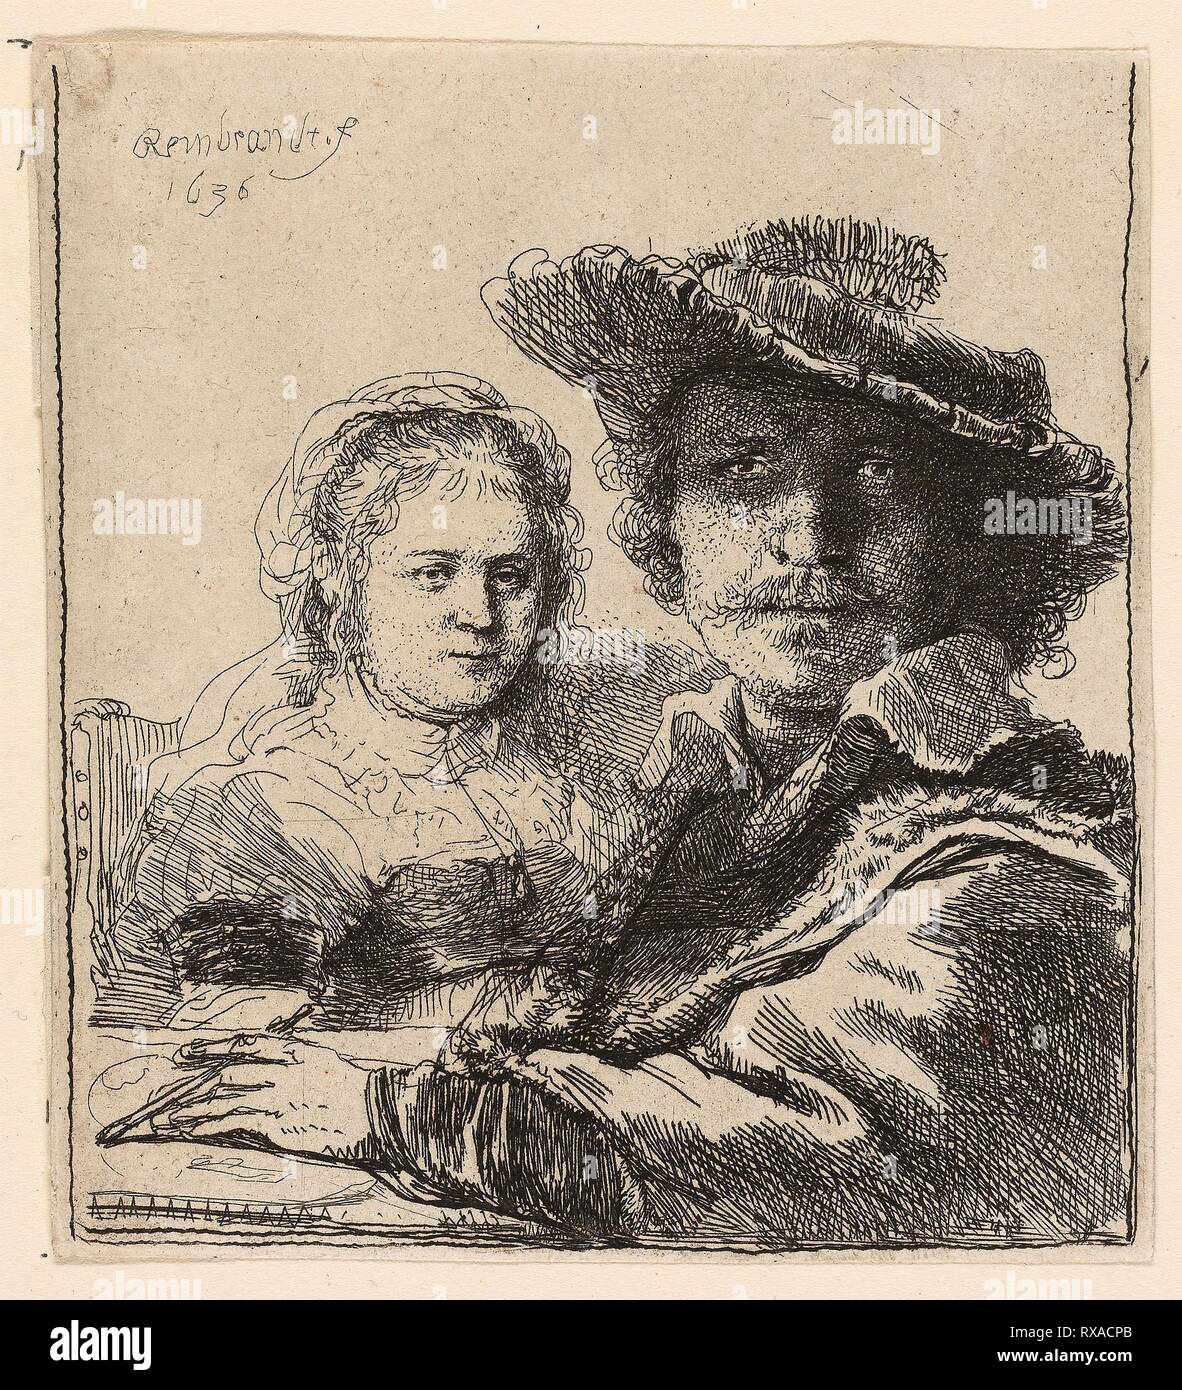 Self-Portrait with Saskia. Rembrandt van Rijn; Dutch, 1606-1669. Date: 1636. Dimensions: 104 x 92 mm (image); 106 x 96 mm (sheet, cut within plate mark). Etching on ivory laid paper. Origin: Holland. Museum: The Chicago Art Institute. Author: REMBRANDT HARMENSZOON VAN RIJN. HARMENSZOON VAN RIJN REMBRANDT. Rembrandt van Rhijn. Stock Photo